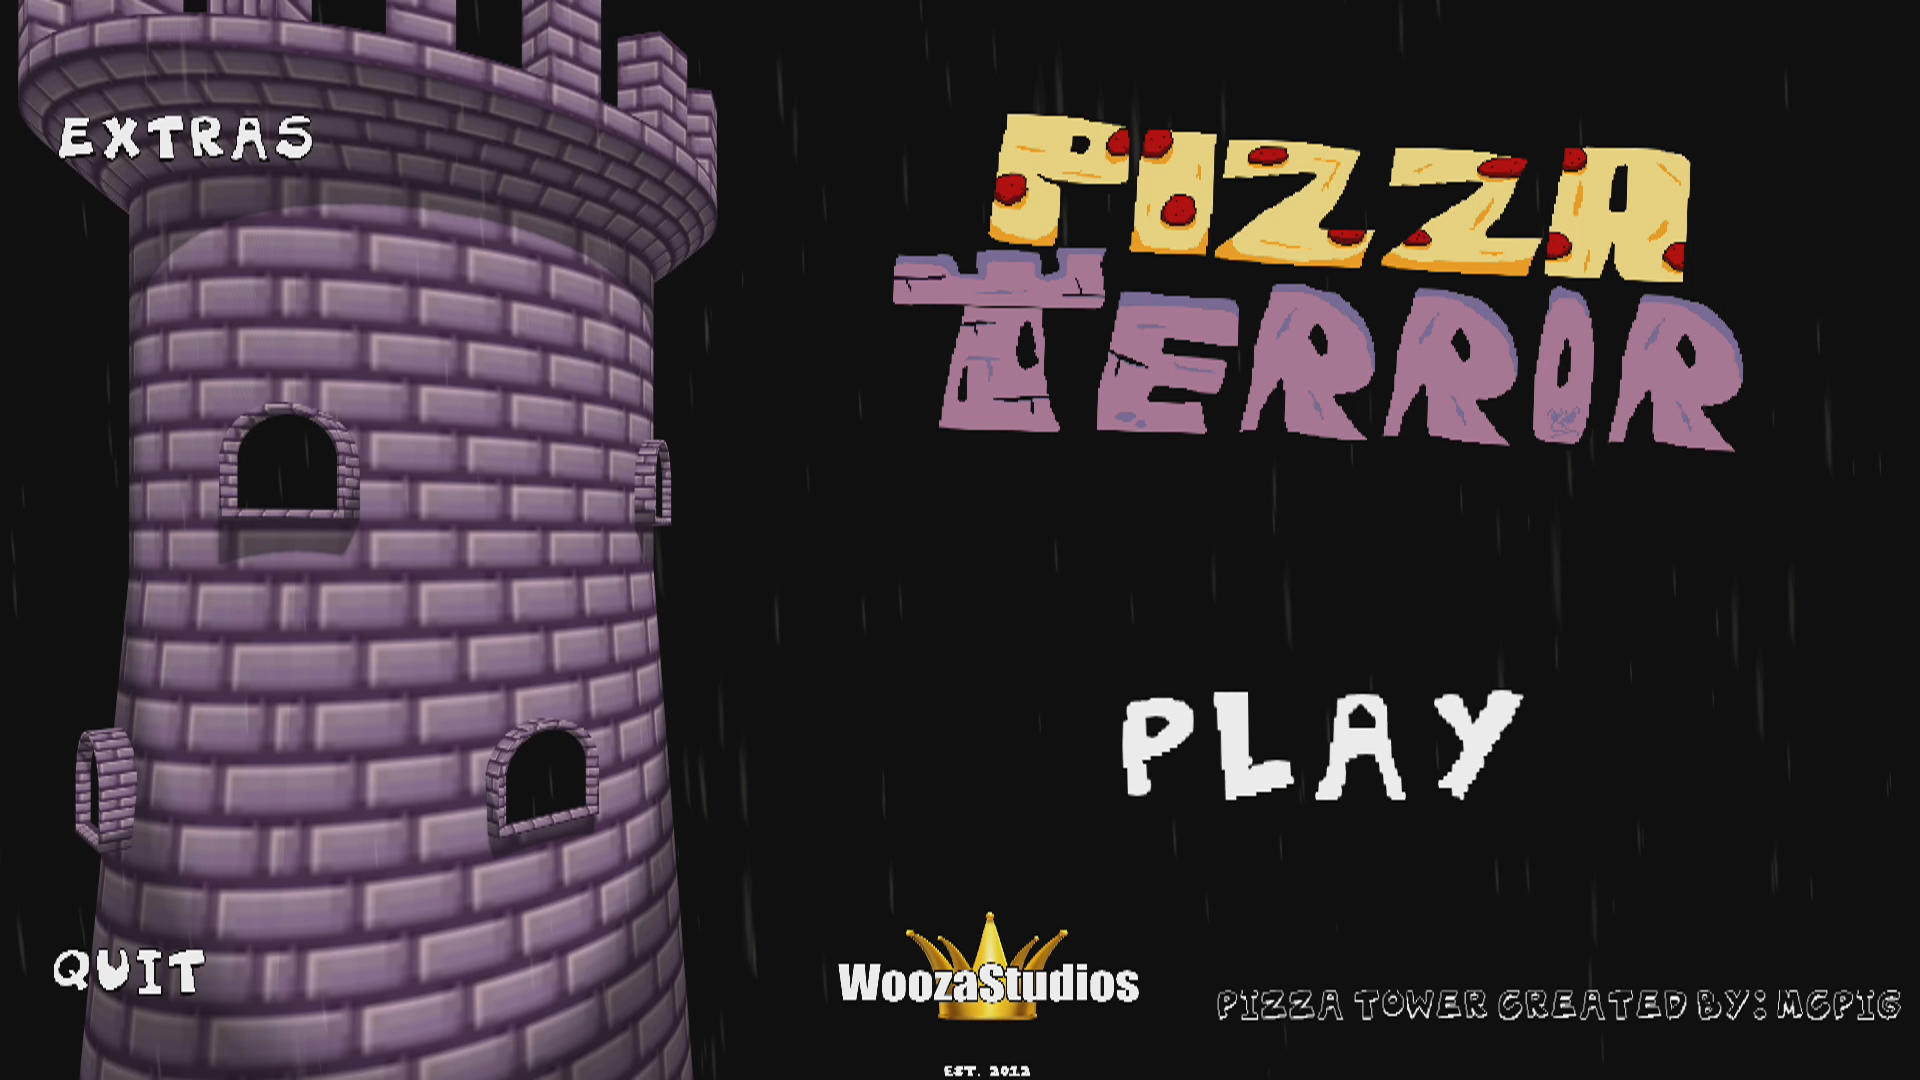 Stream Pizza Tower RPG (canceled) - Fencer by River347